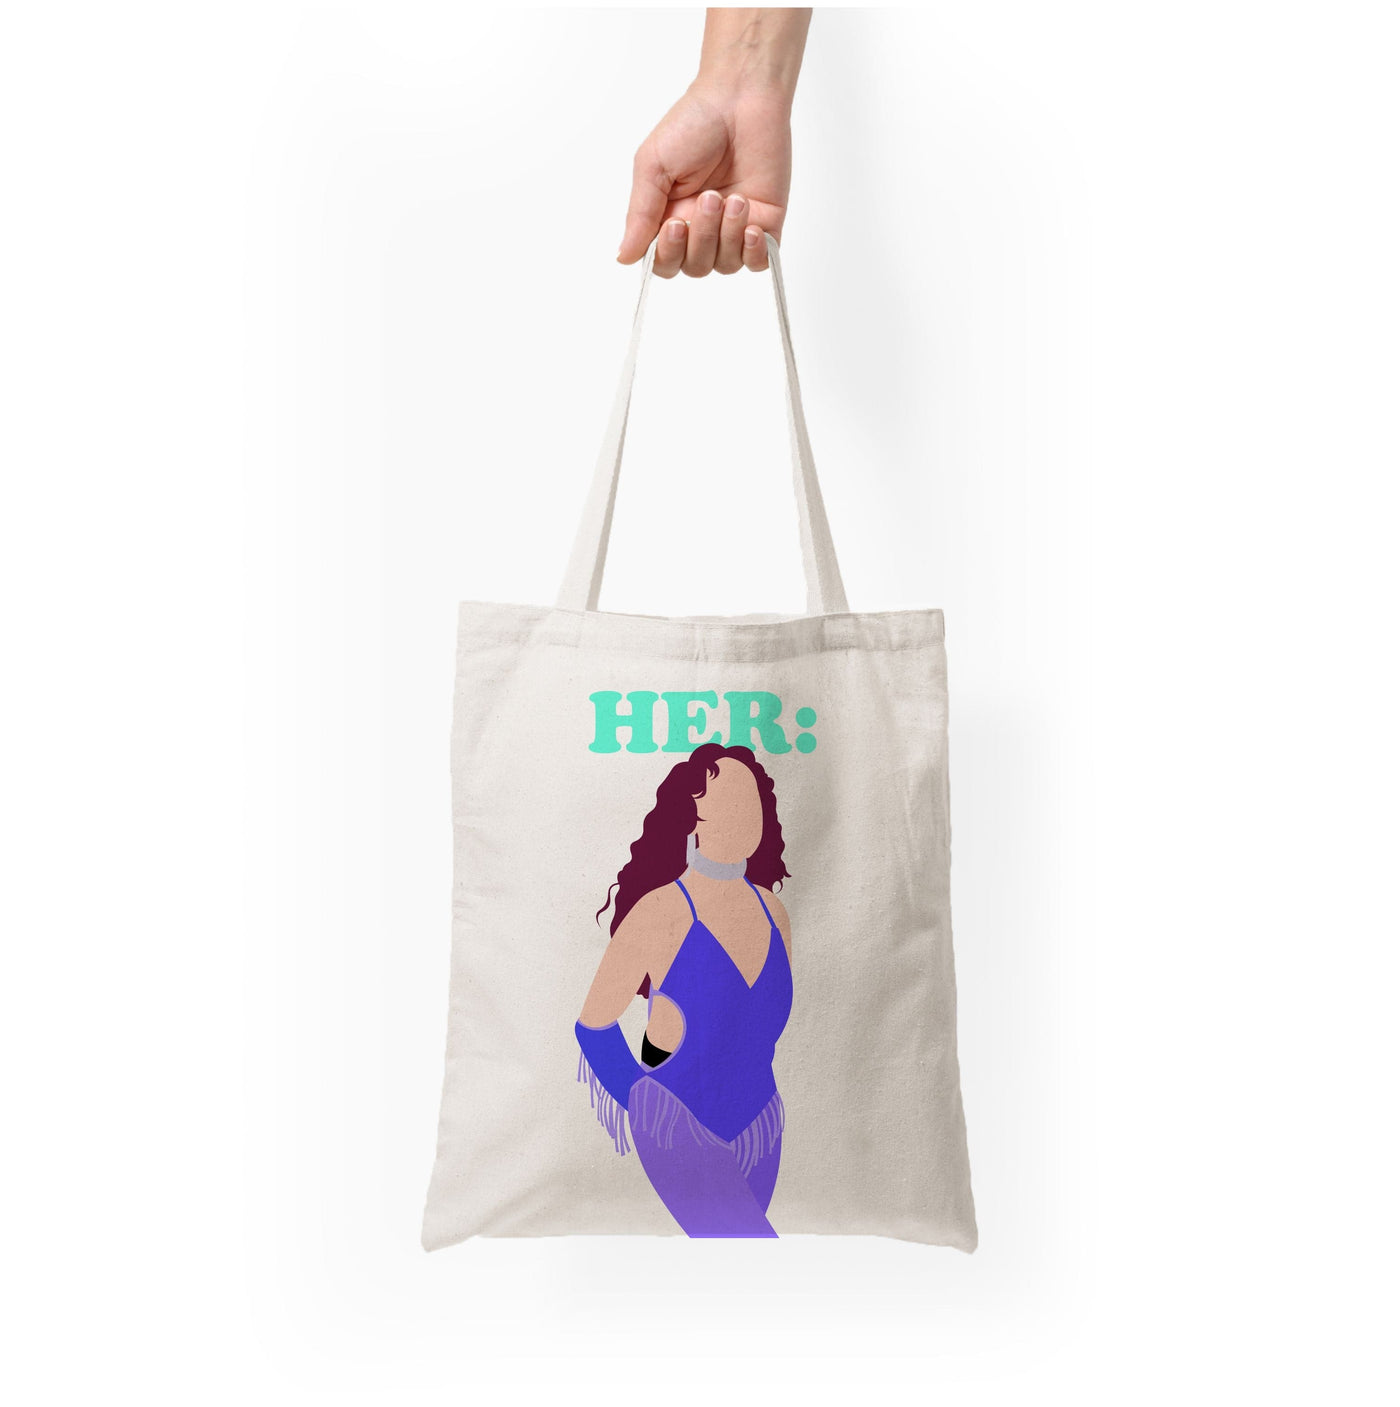 Her - Chappell Roan Tote Bag